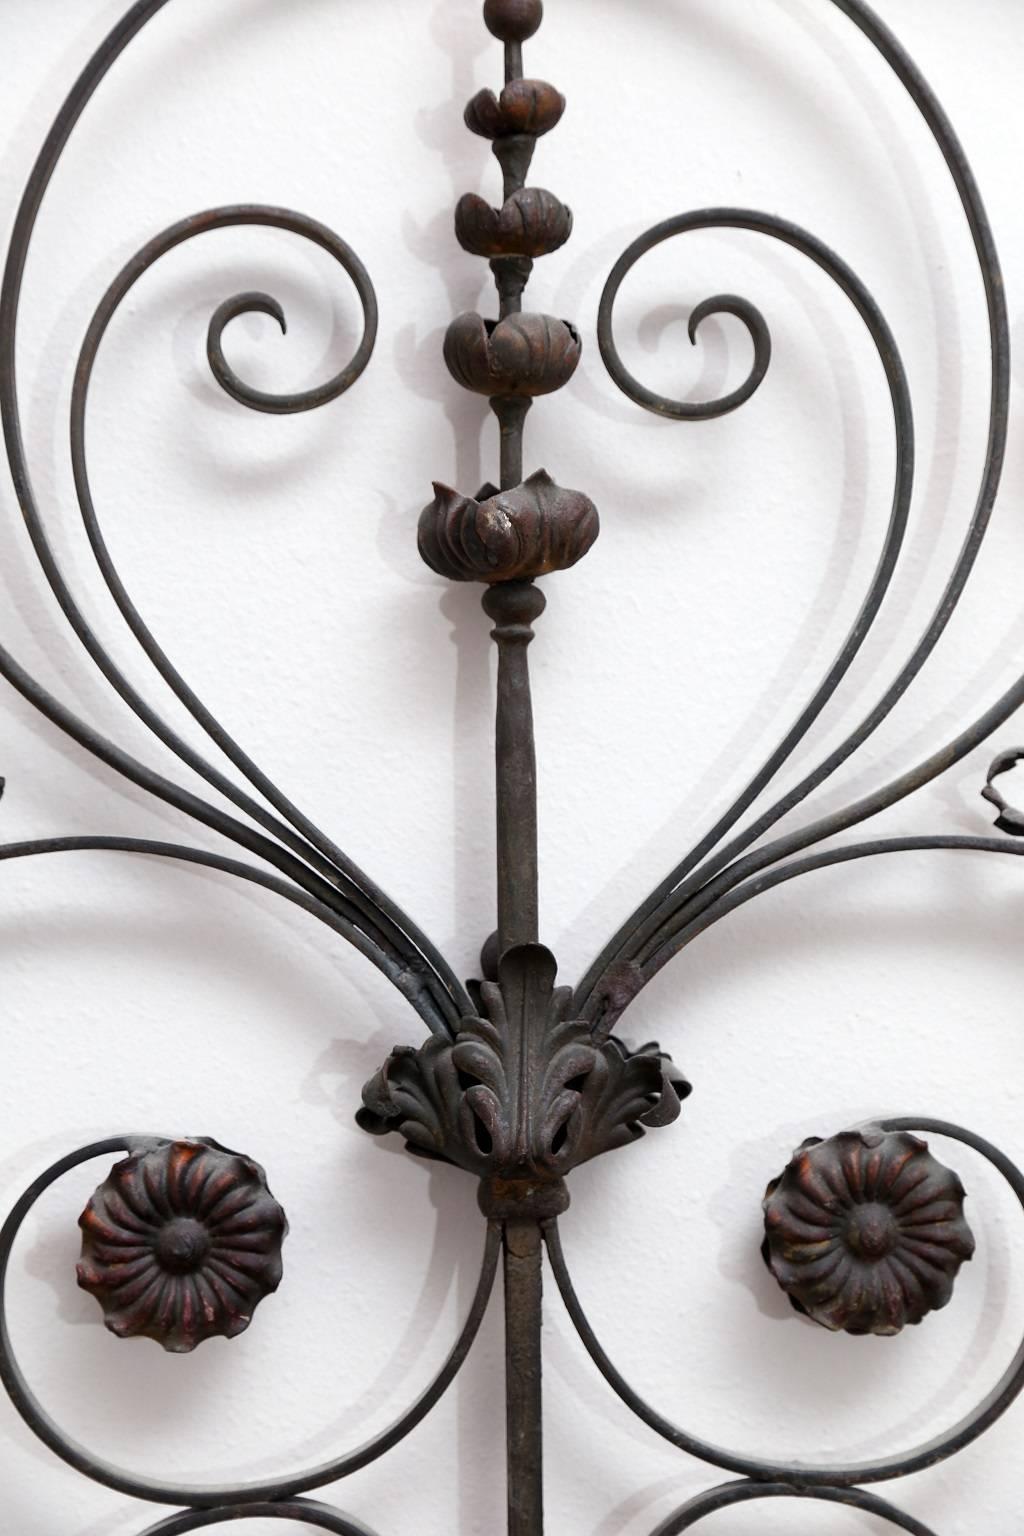 Louis XVI Pair of 19th Century French Forged Iron Gates, later adapted as a Headboard